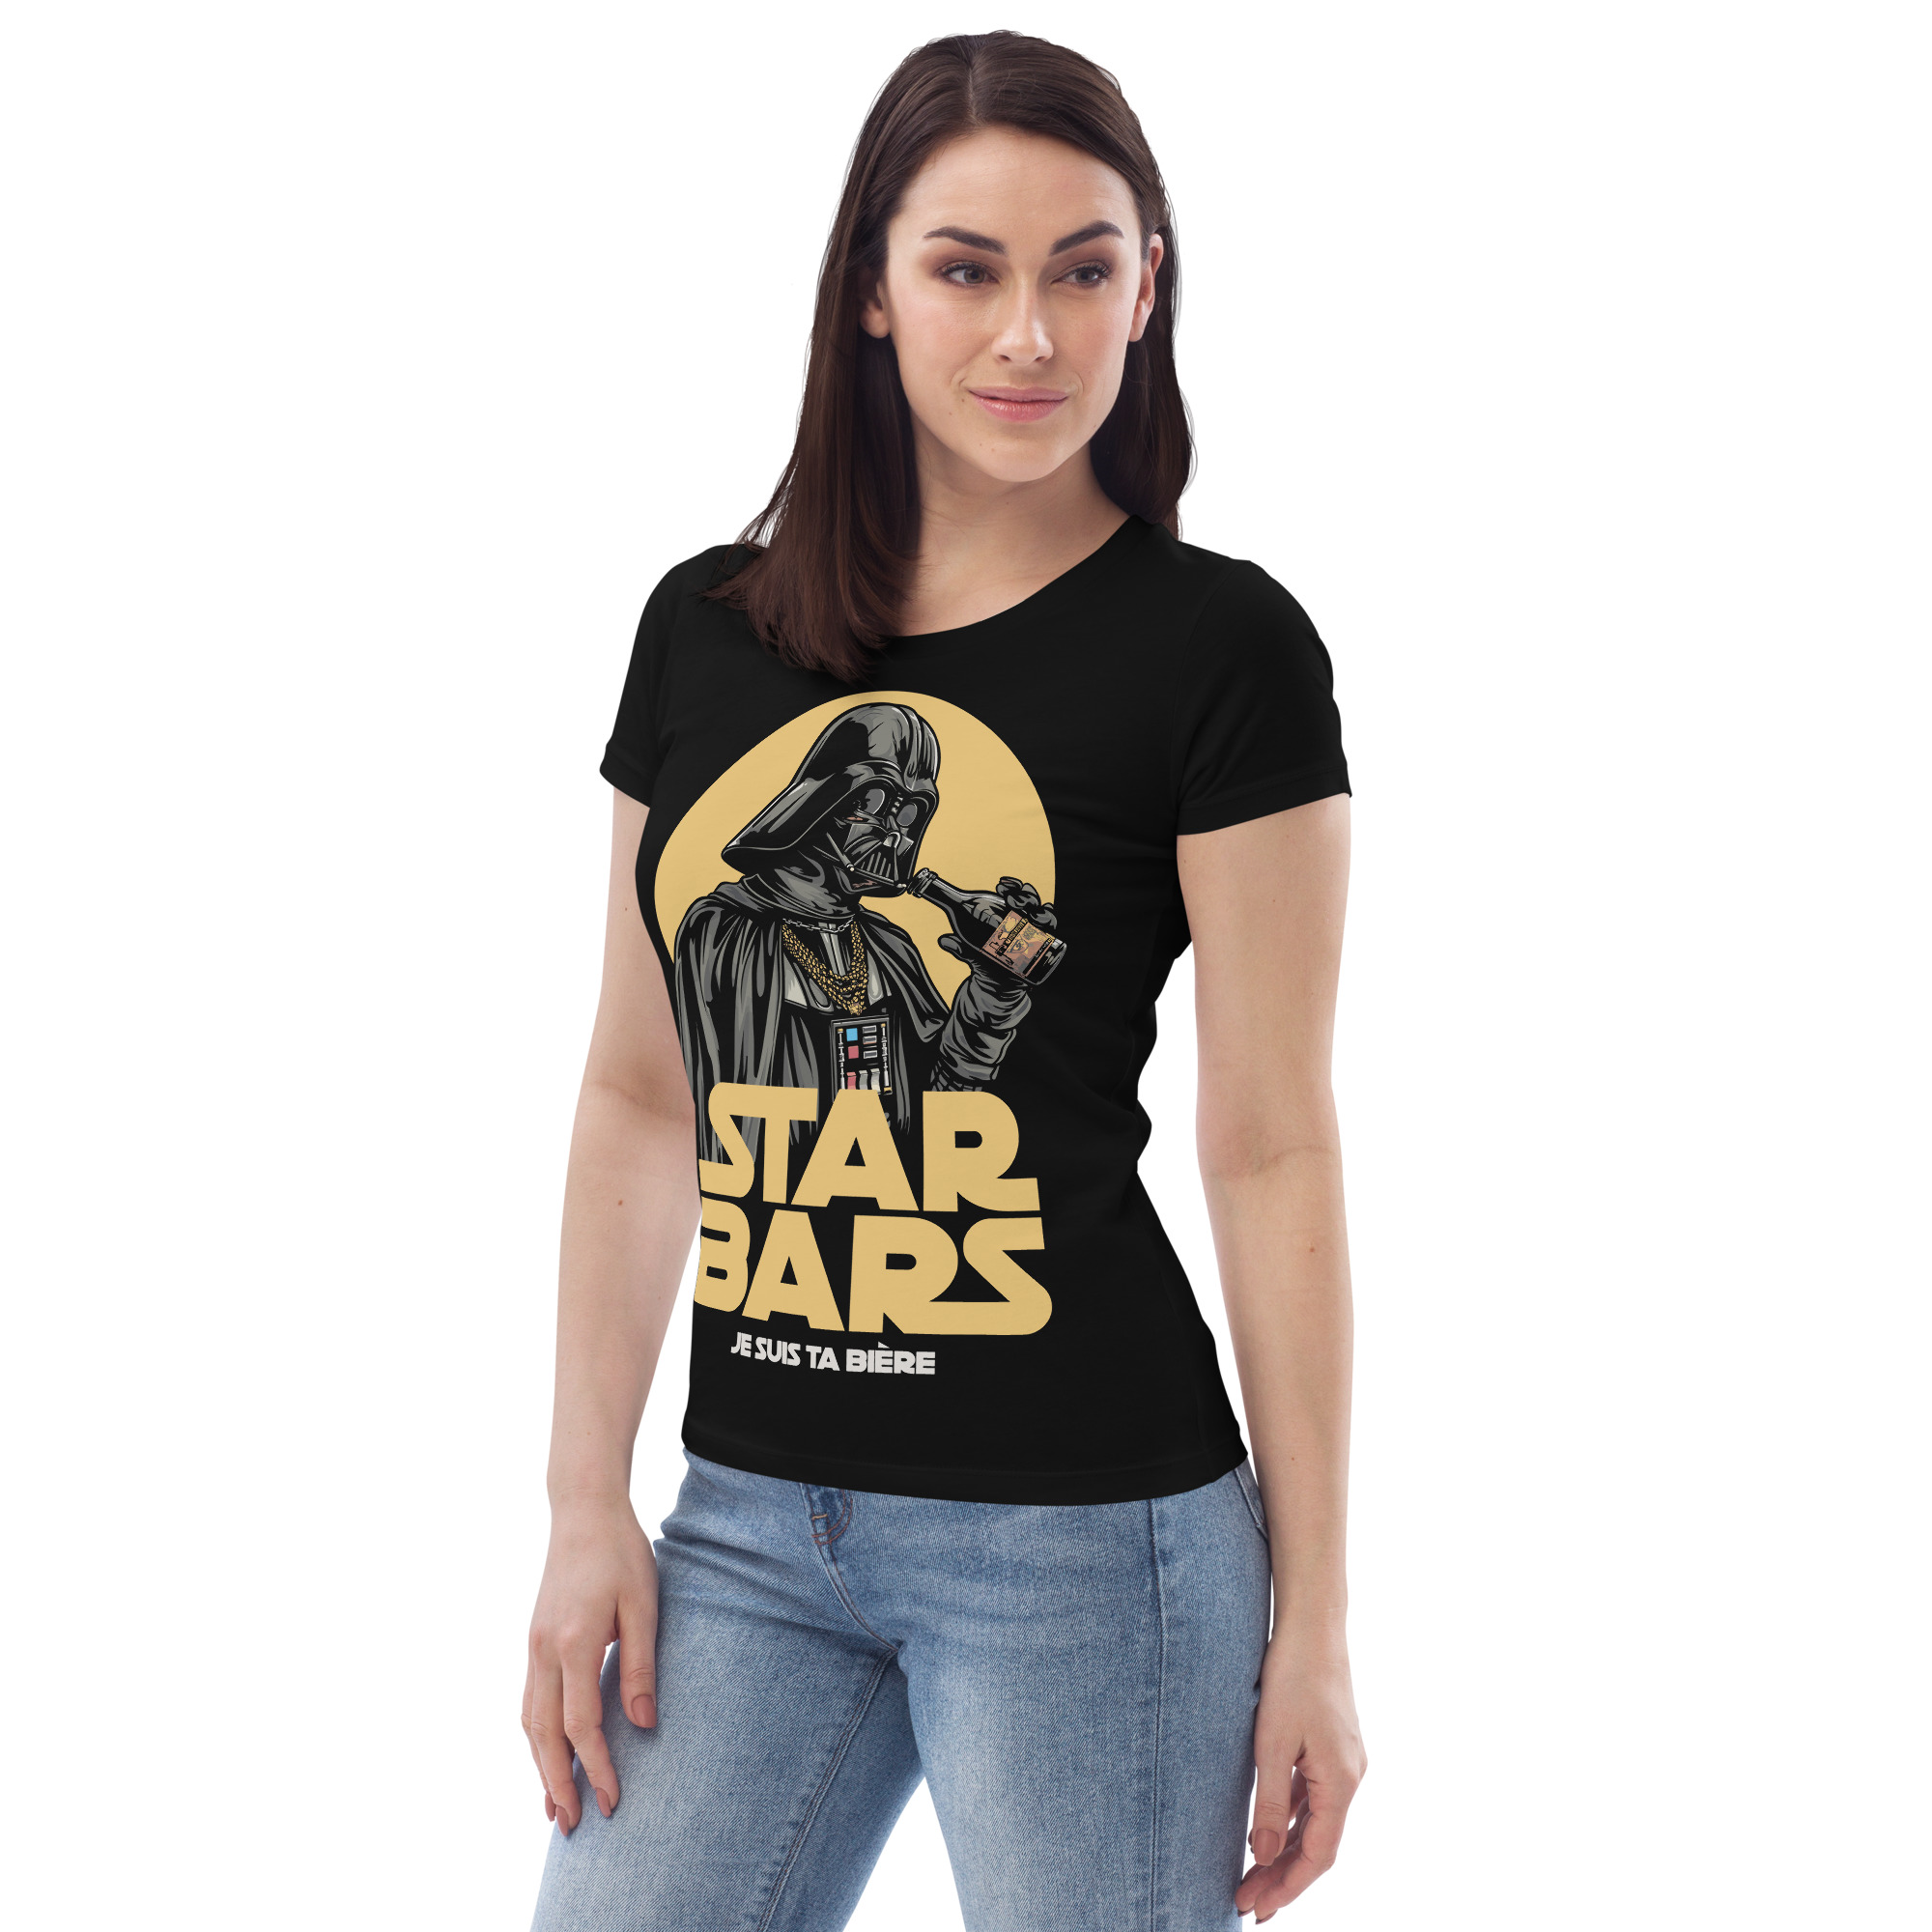 Women’s T-shirt – Star Wars – I am your beer T-shirts Wearyt